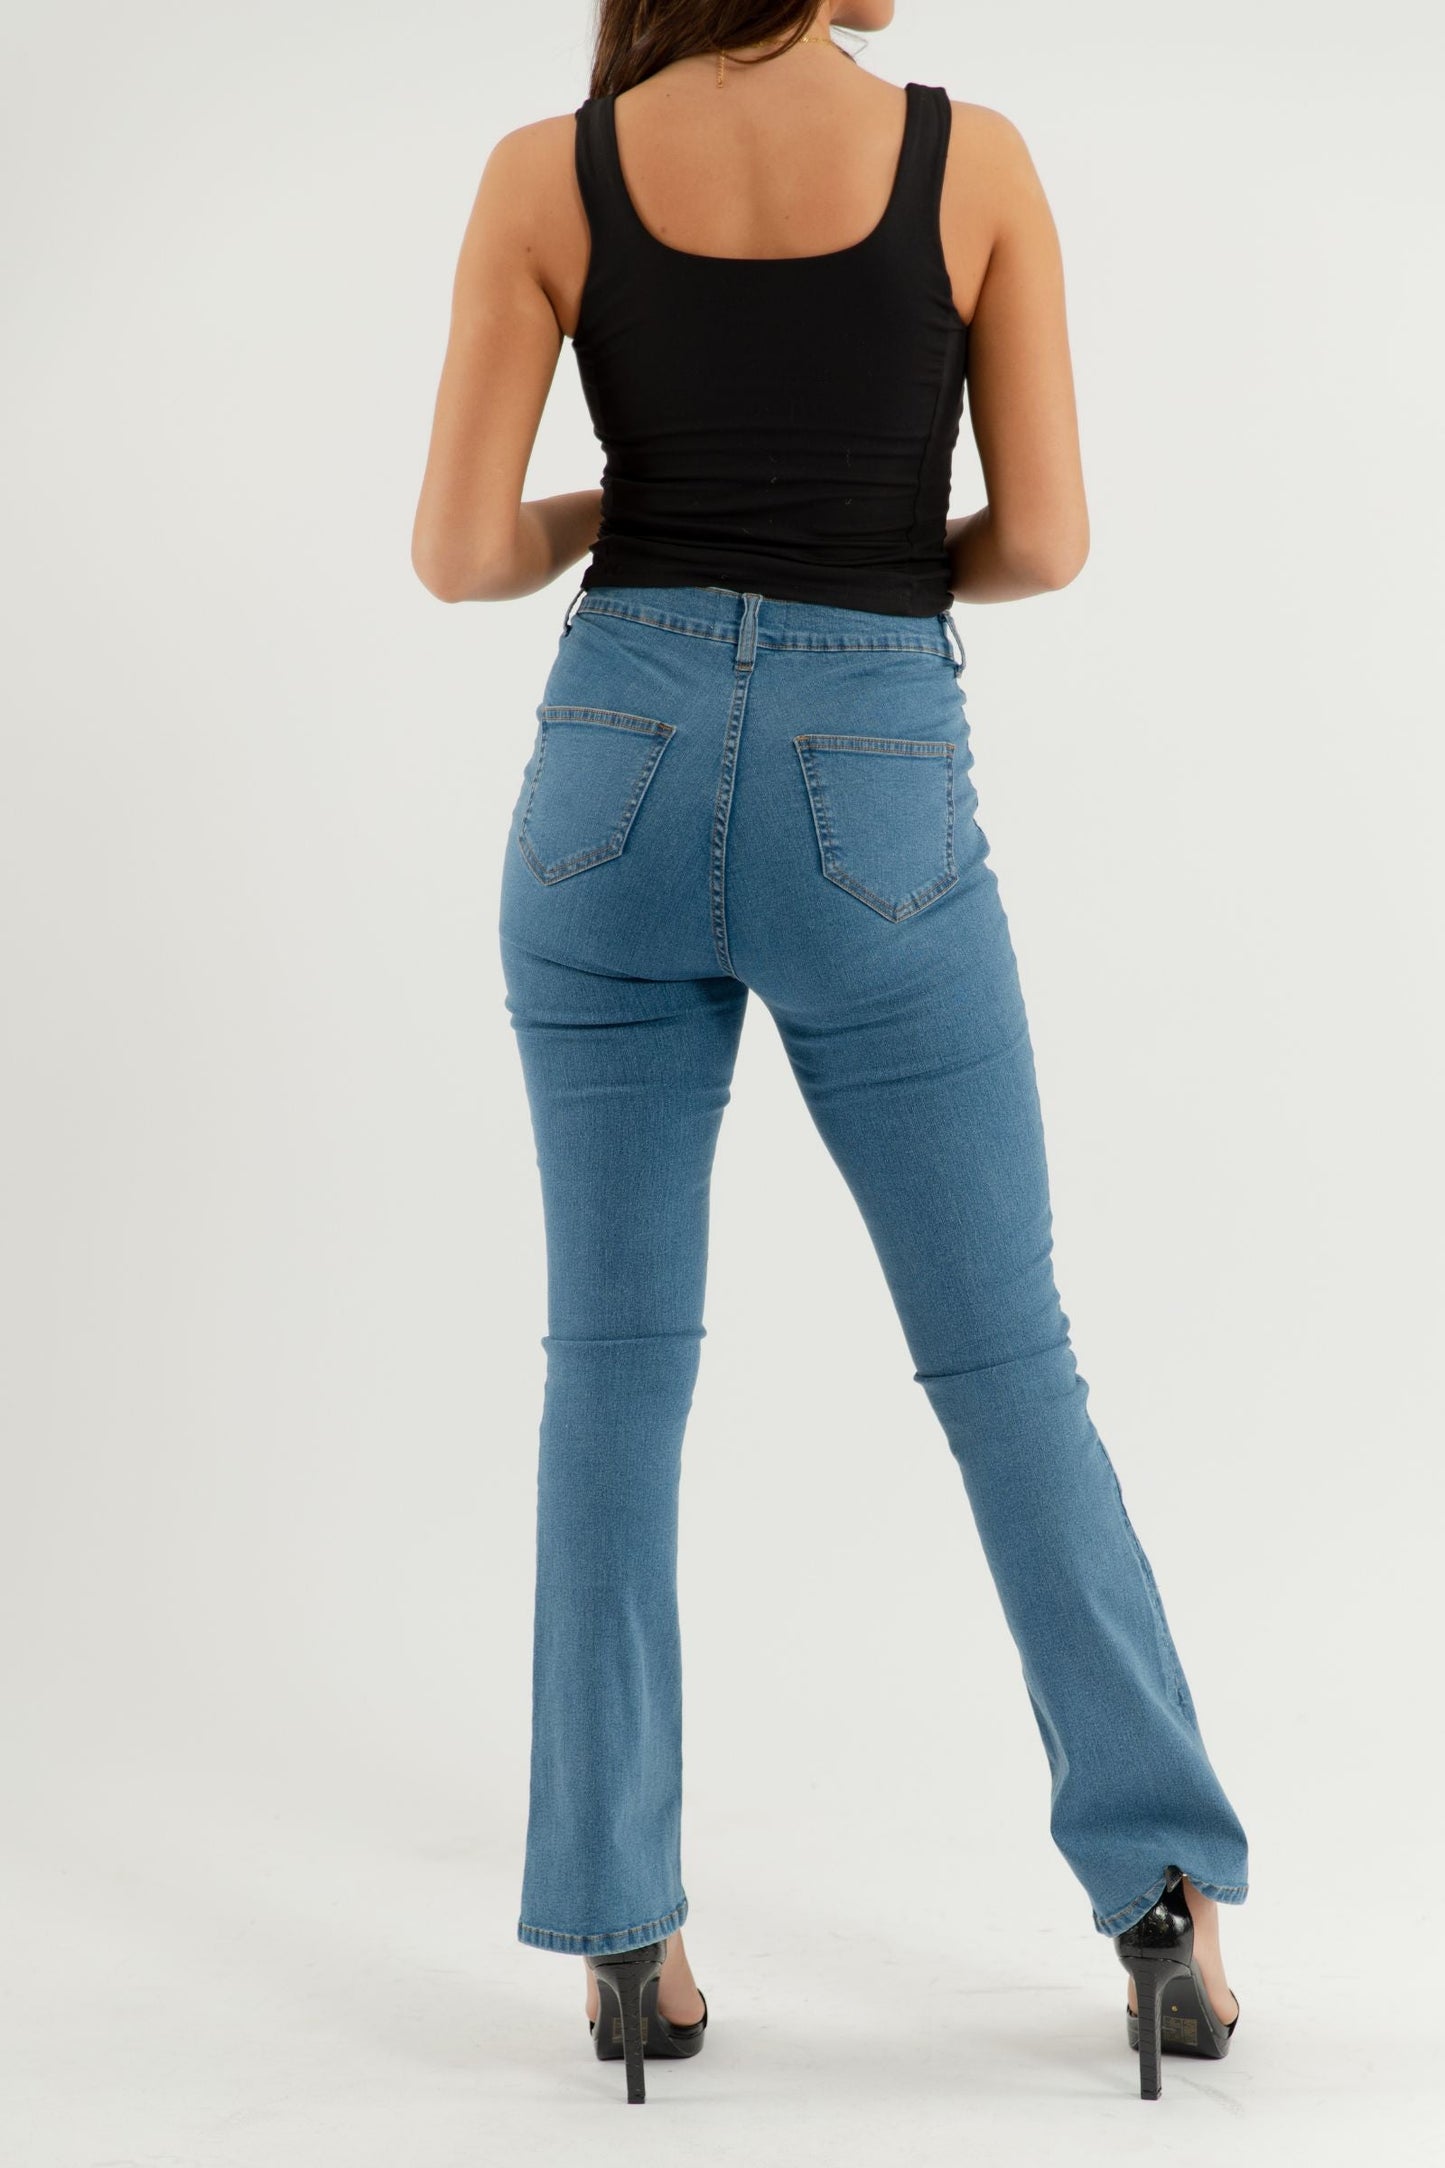 HARRIET Stretchy Flare Disco Jeans - Mid Blue